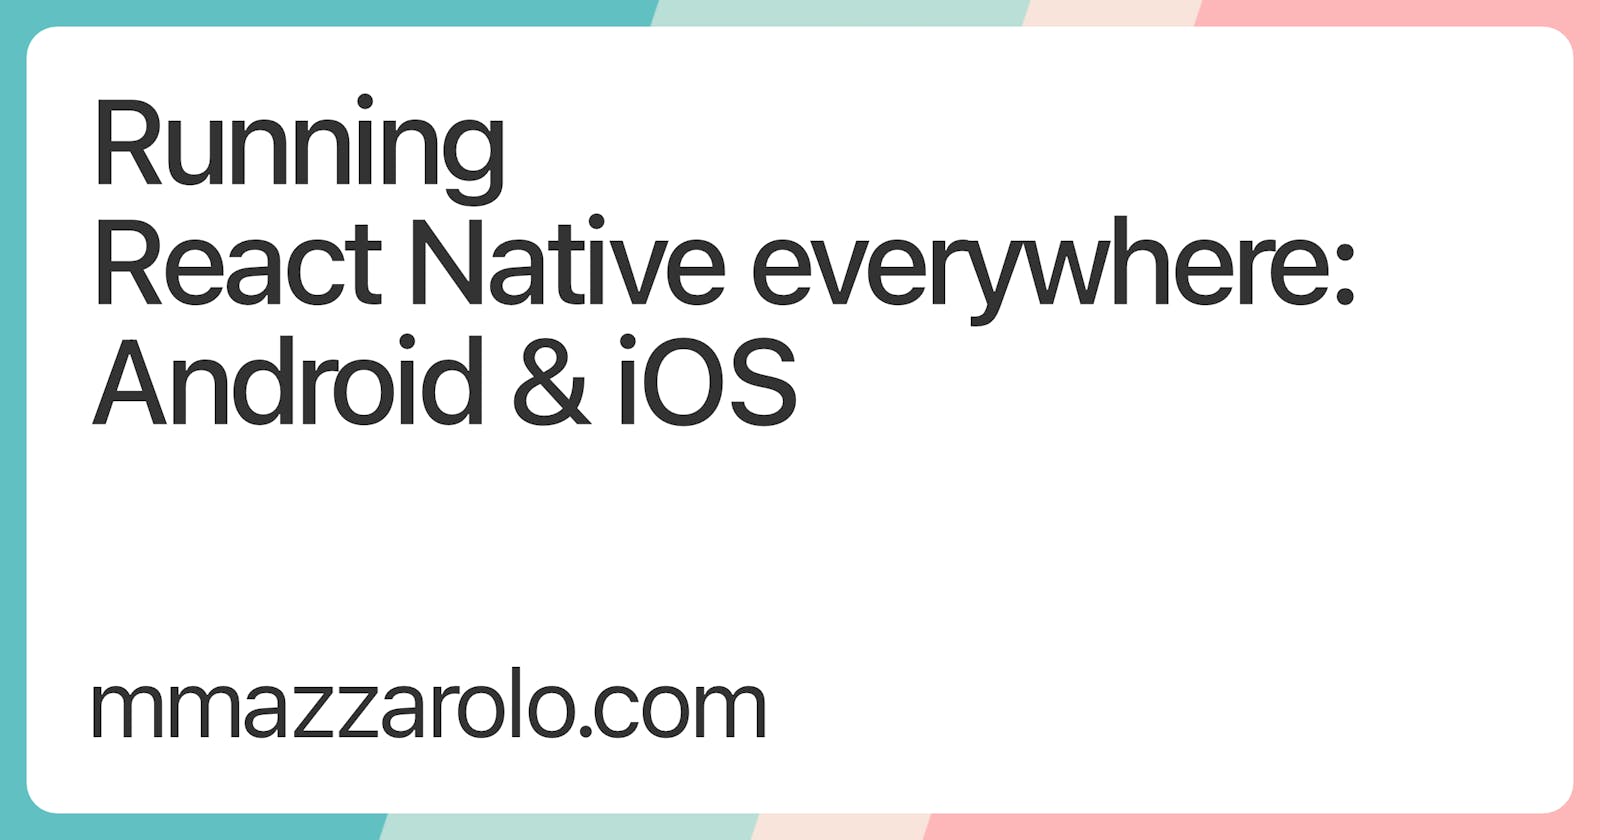 Running React Native everywhere: Android & iOS